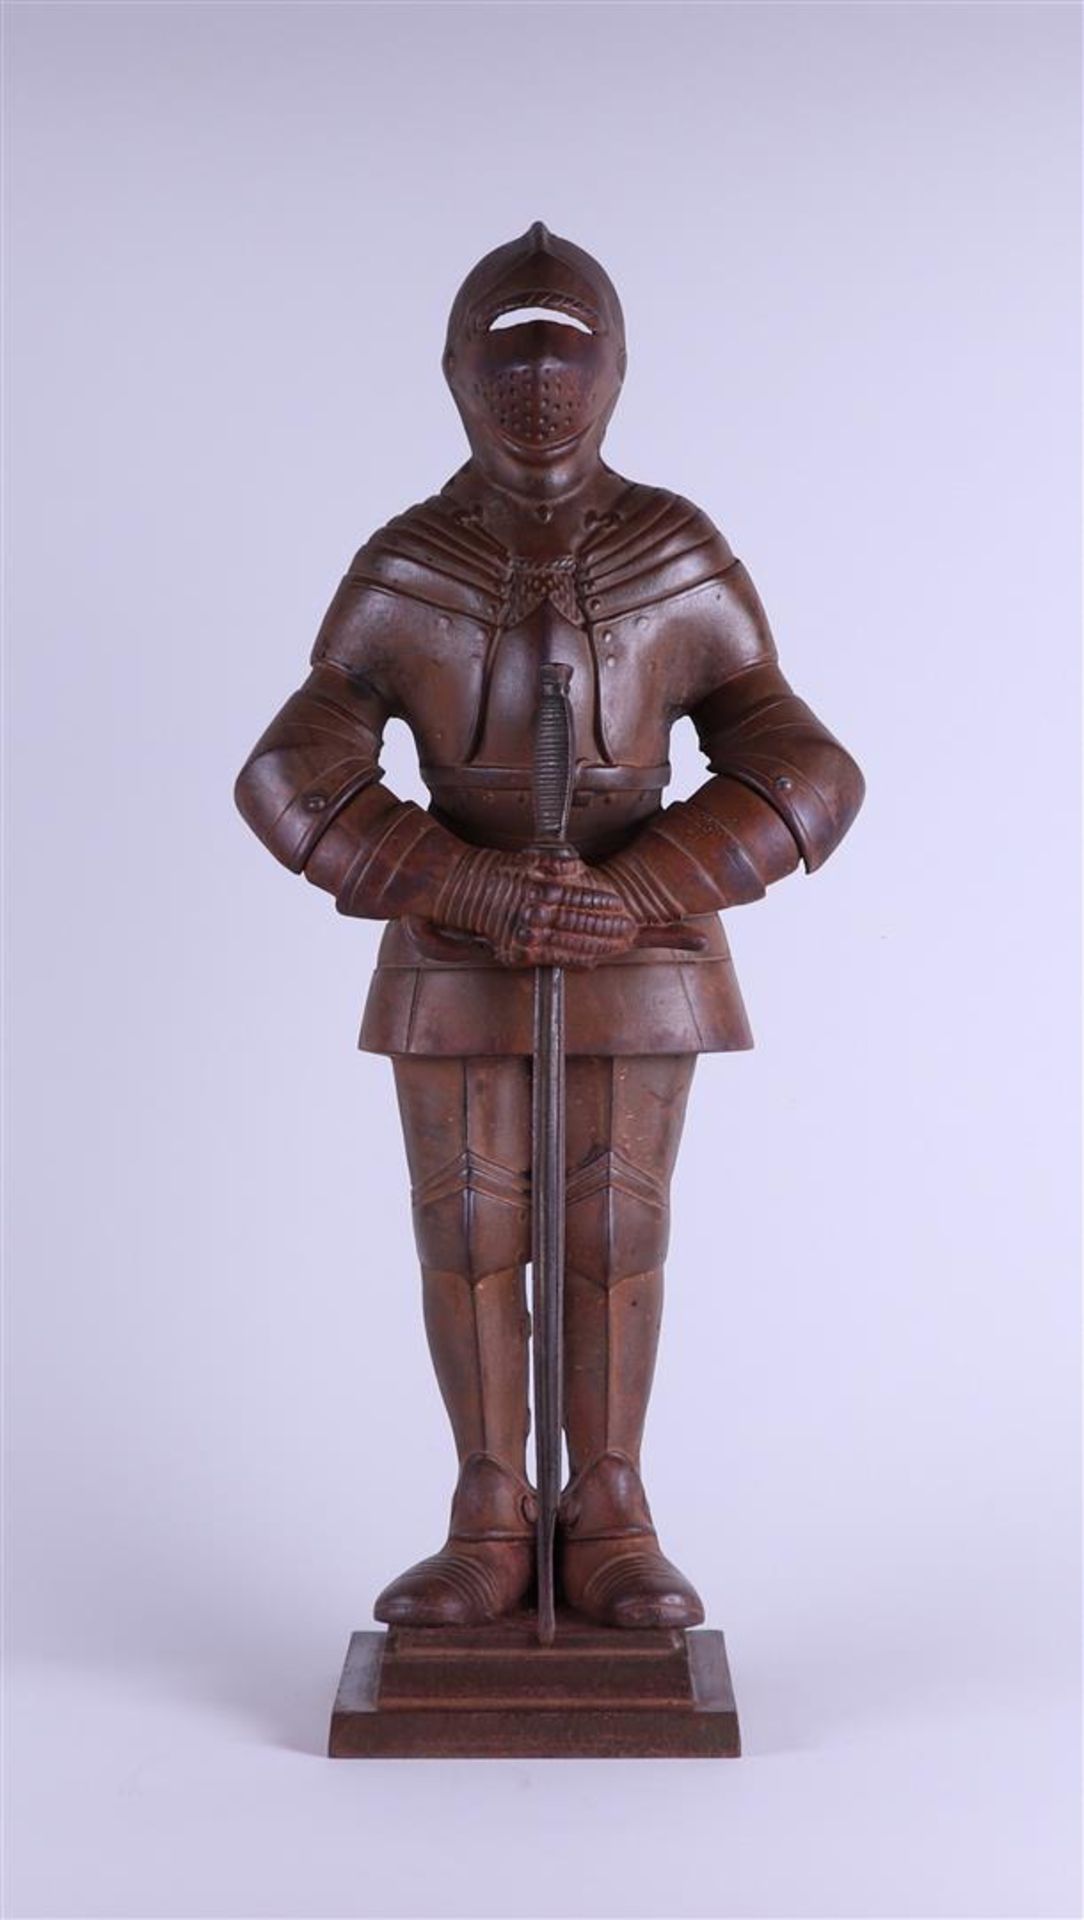 A cast iron sculpture of a soldier, marked 'a opreij maastricht' on the back.